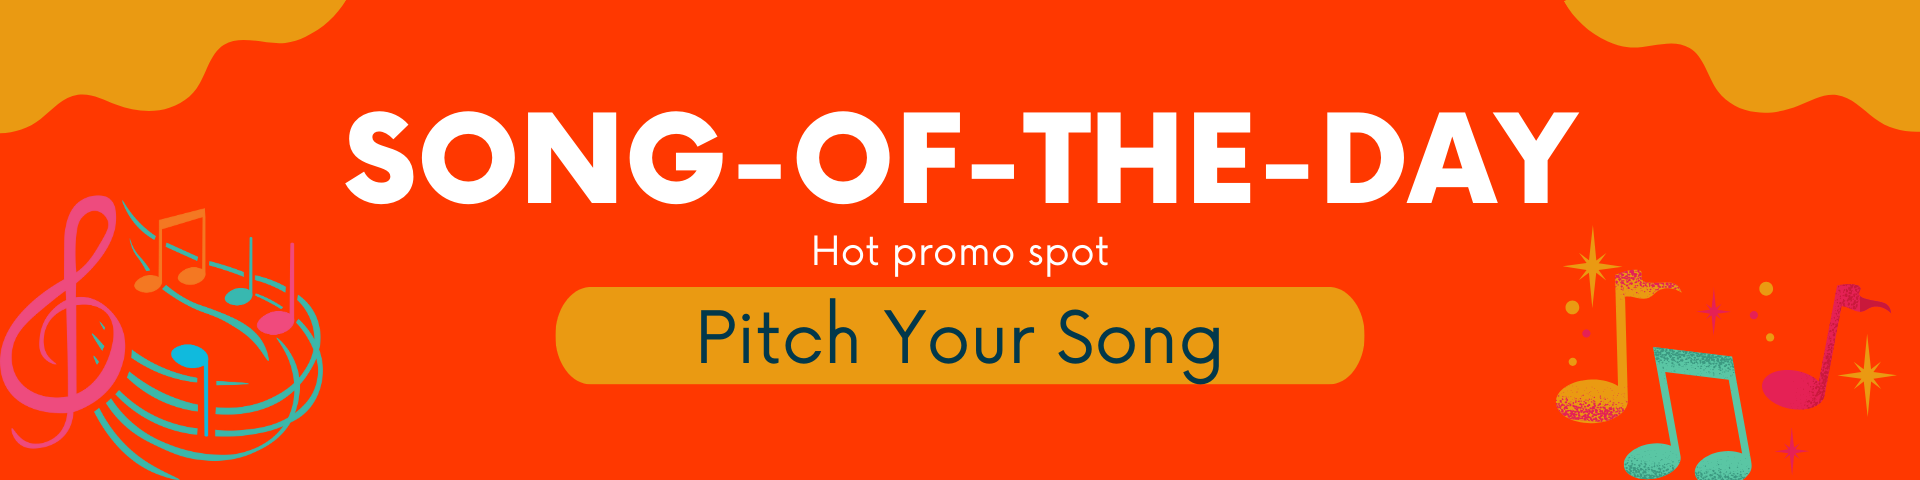 Song of the day hot promo spot